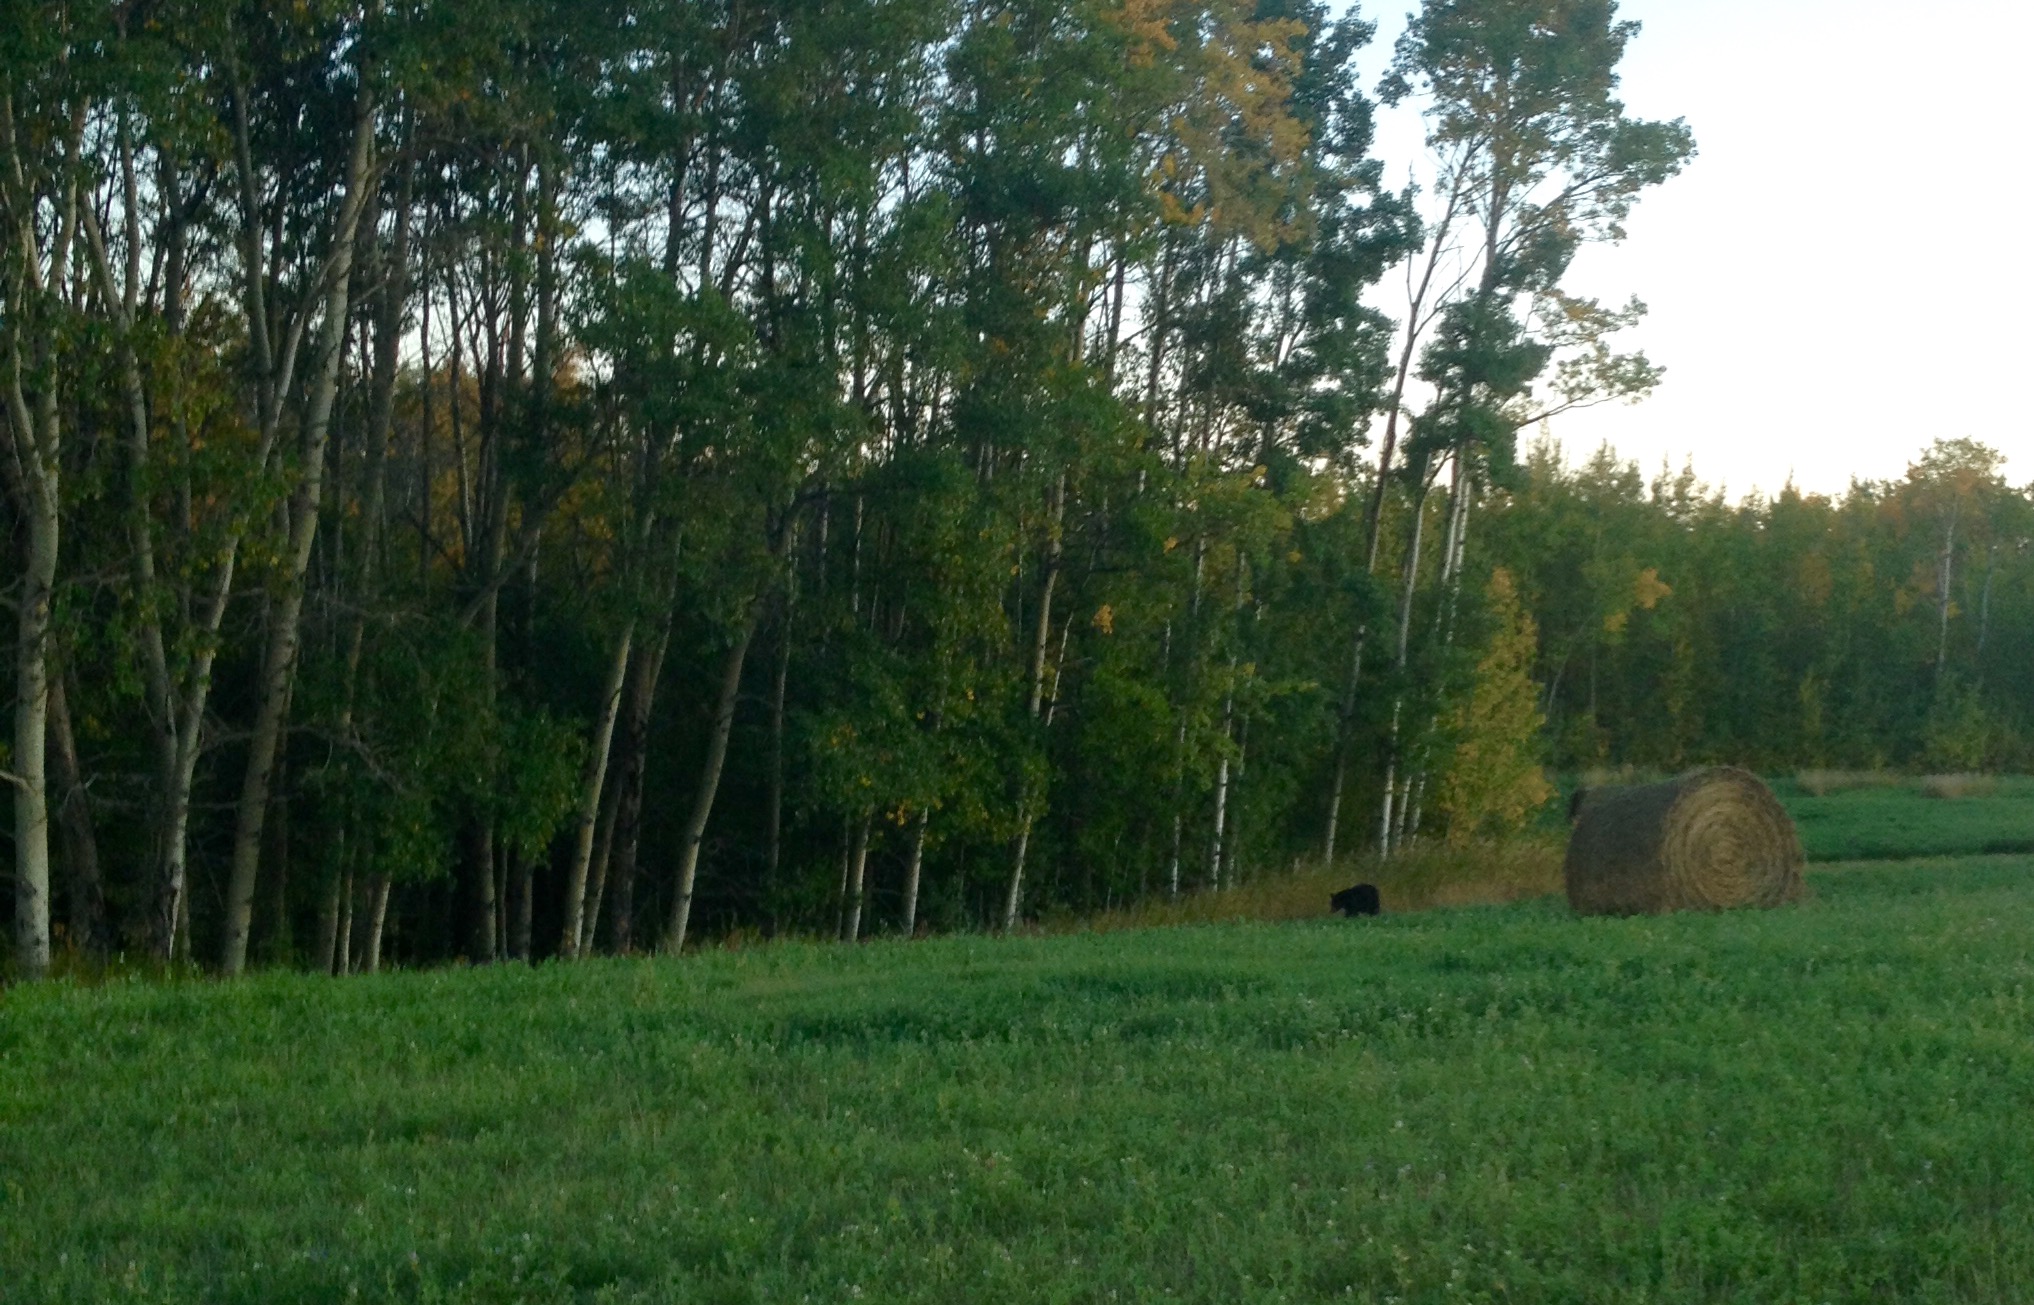 a grassy field with trees and a bale of hay